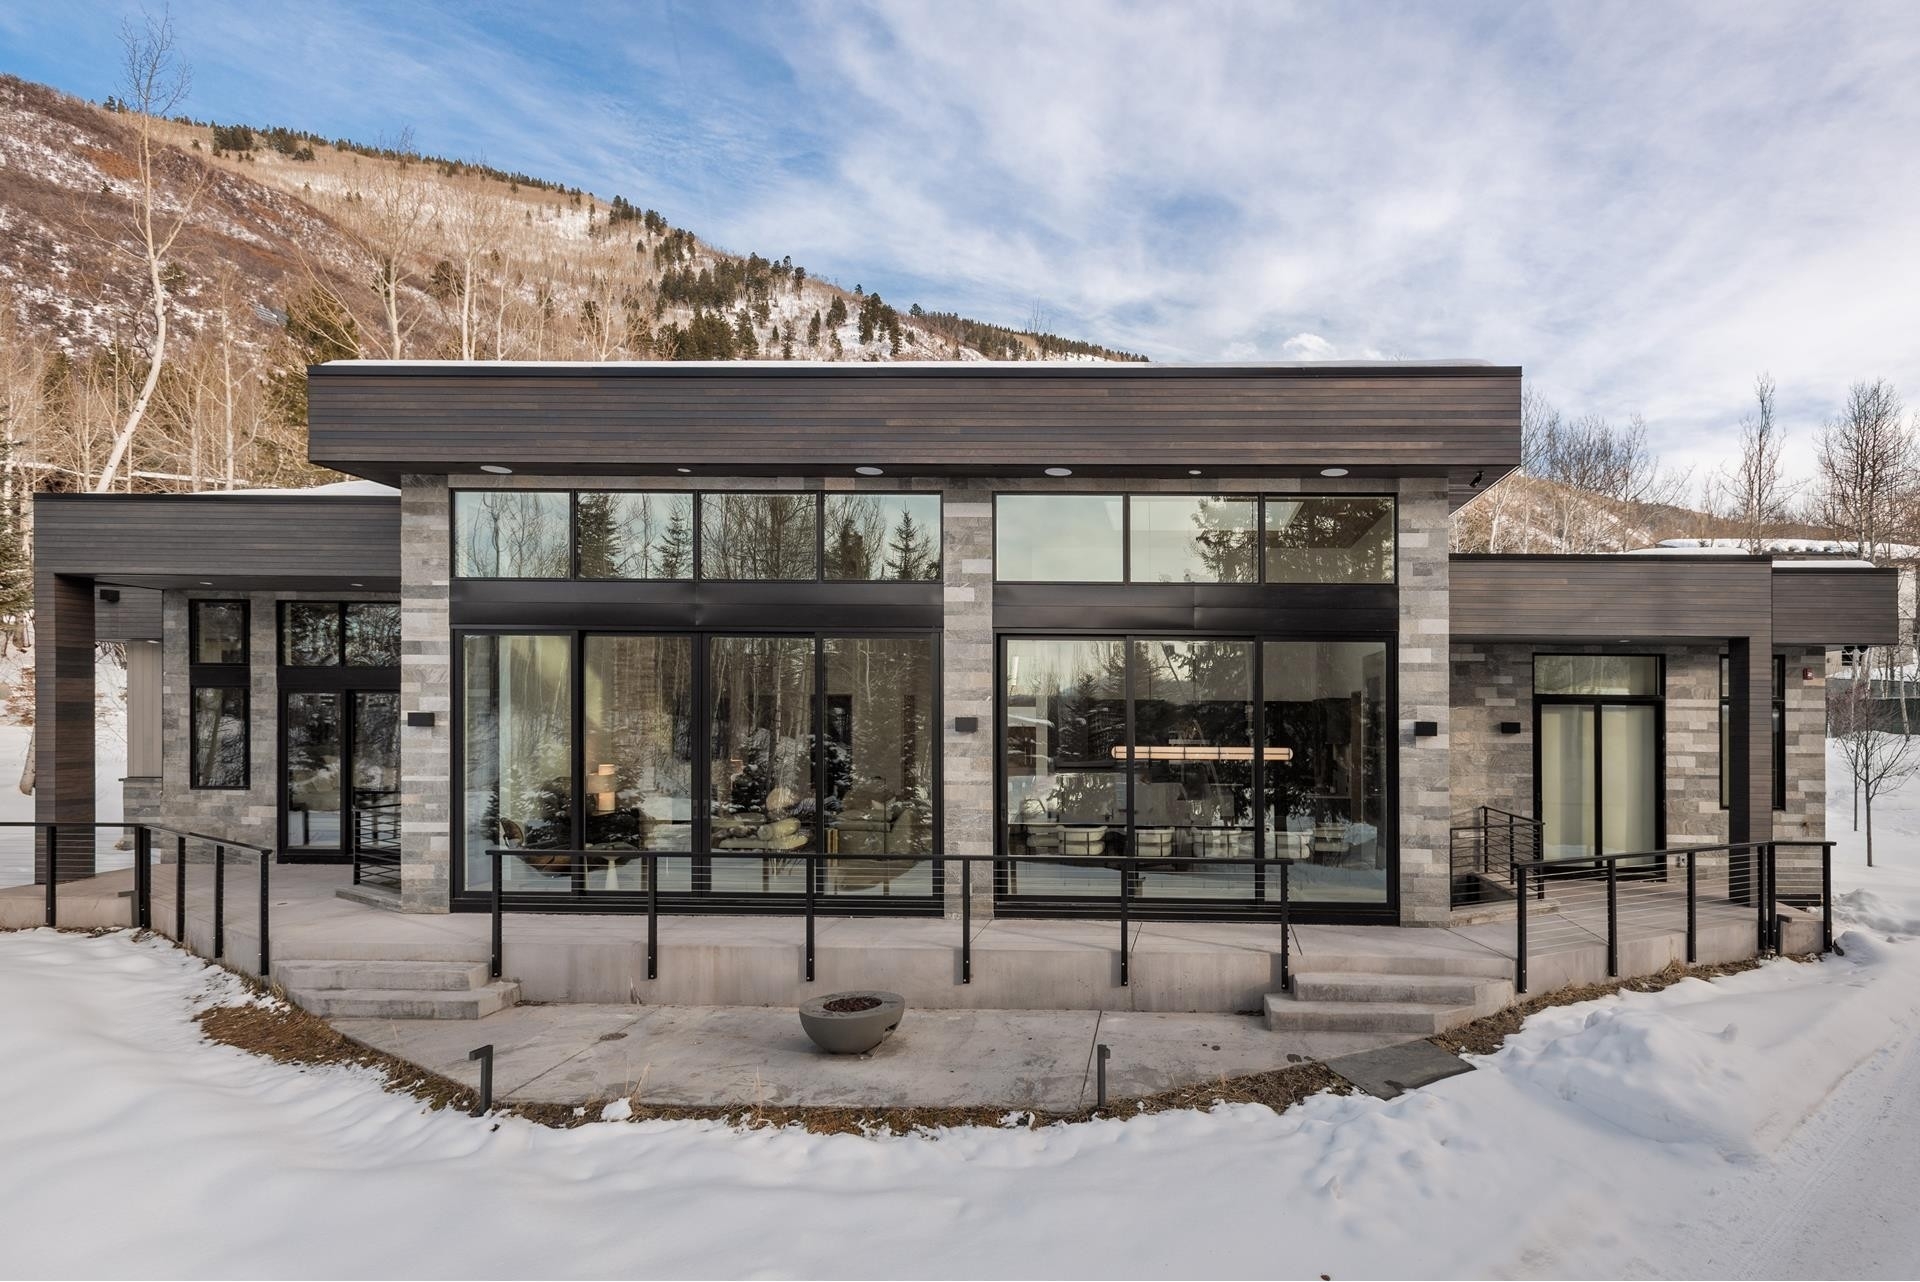 Single Family Home for Sale at The East End, Aspen, CO 81611